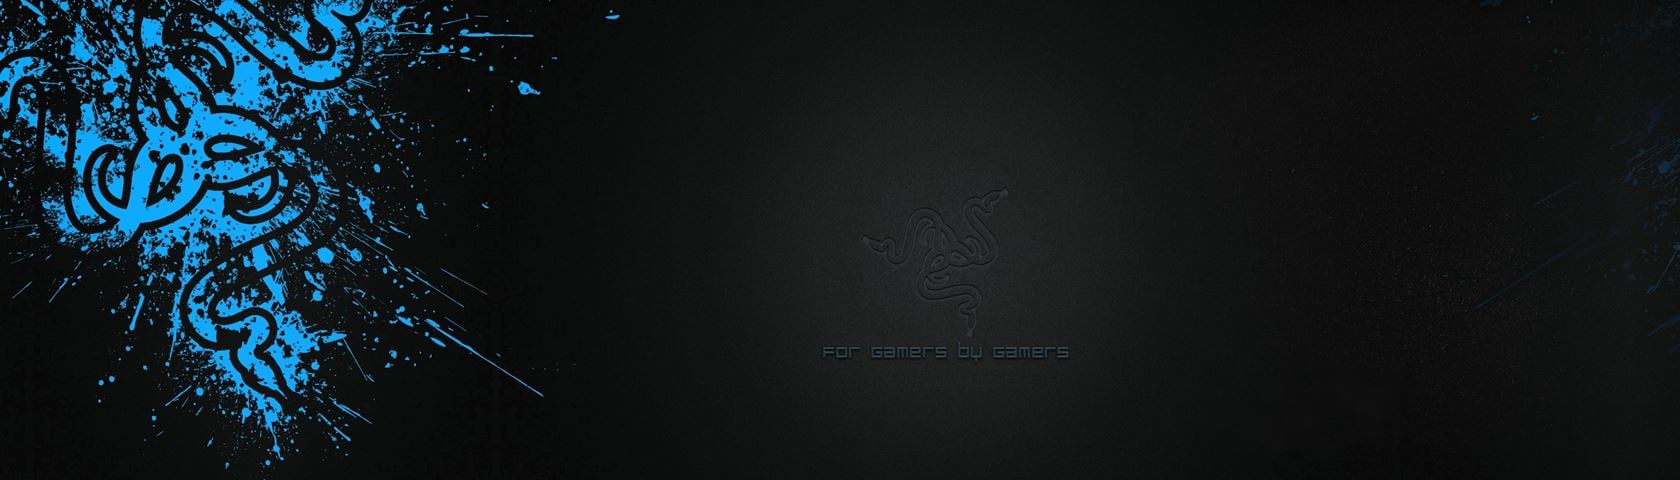 RAZER Images WallpaperFusion by Binary Fortress Software 1680x480